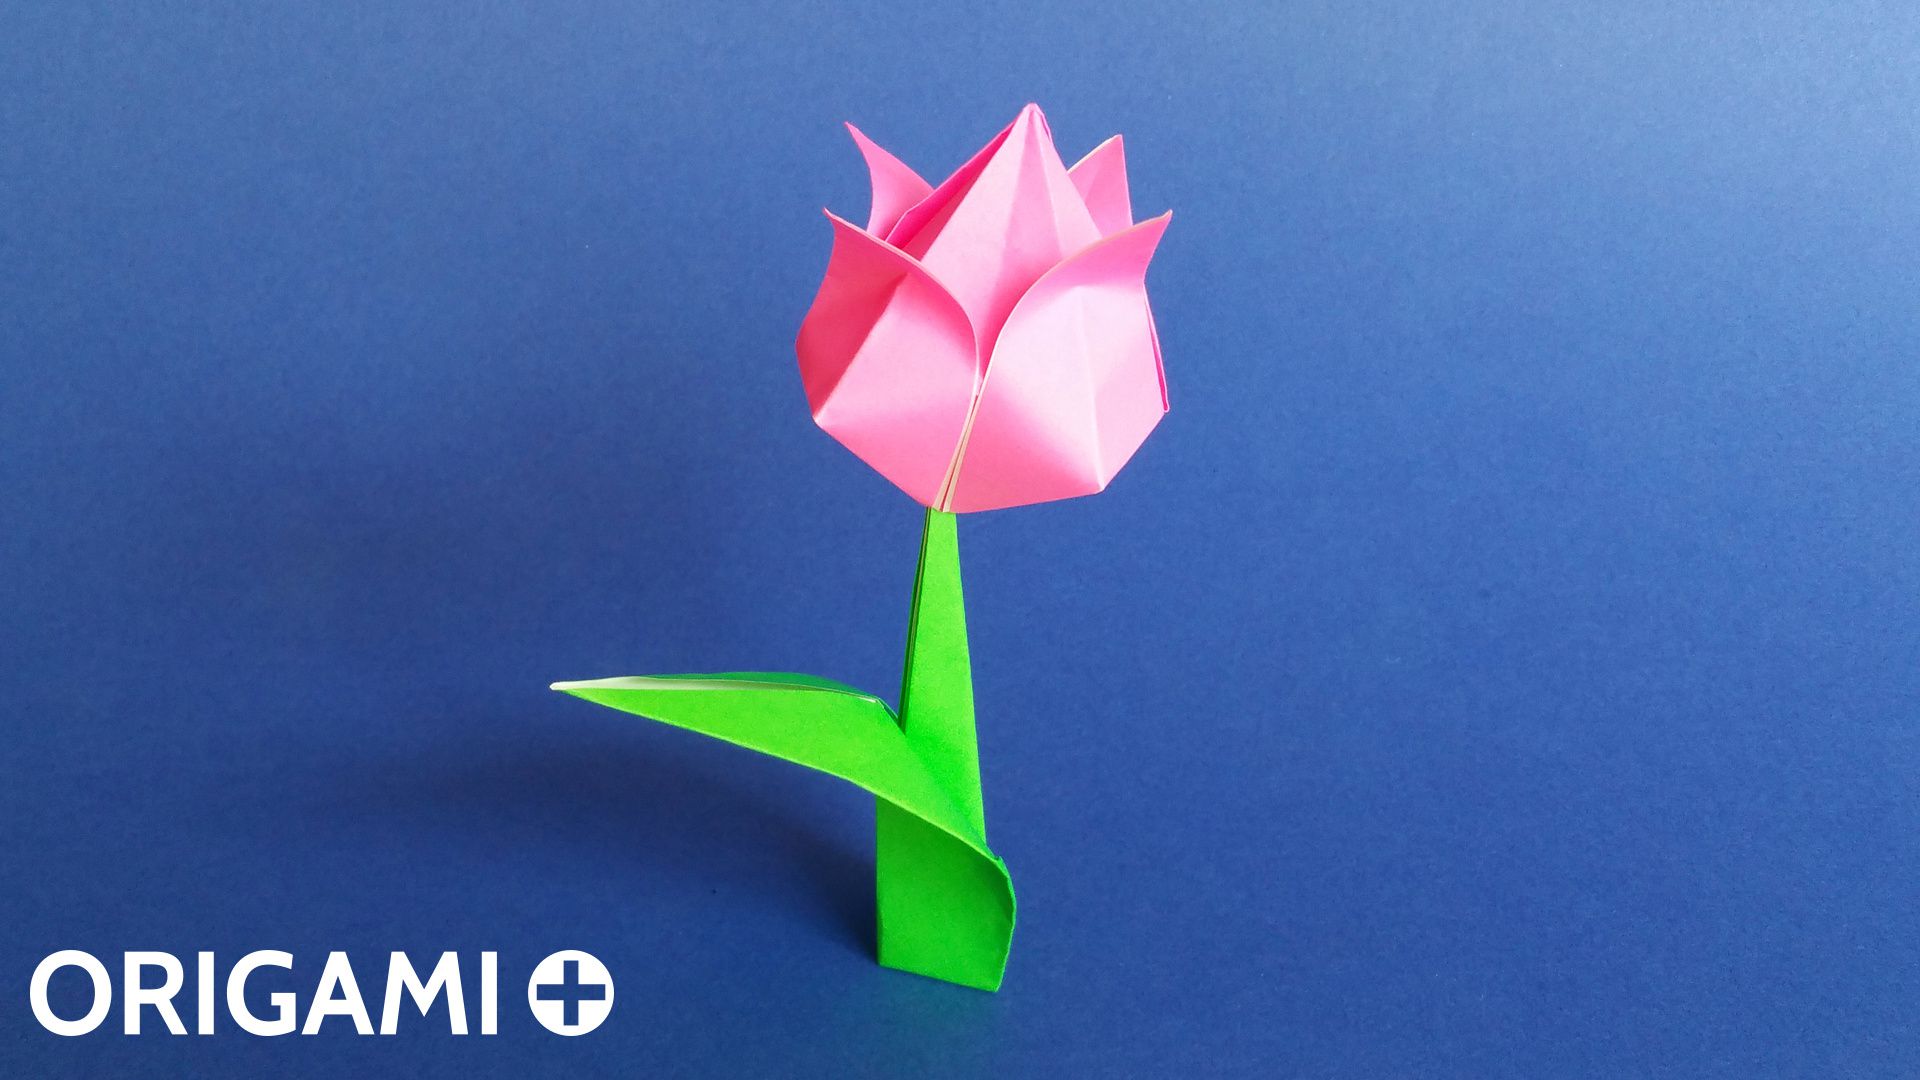 How to Make Origami Flowers - Step by Step Origami Tulip Instructions